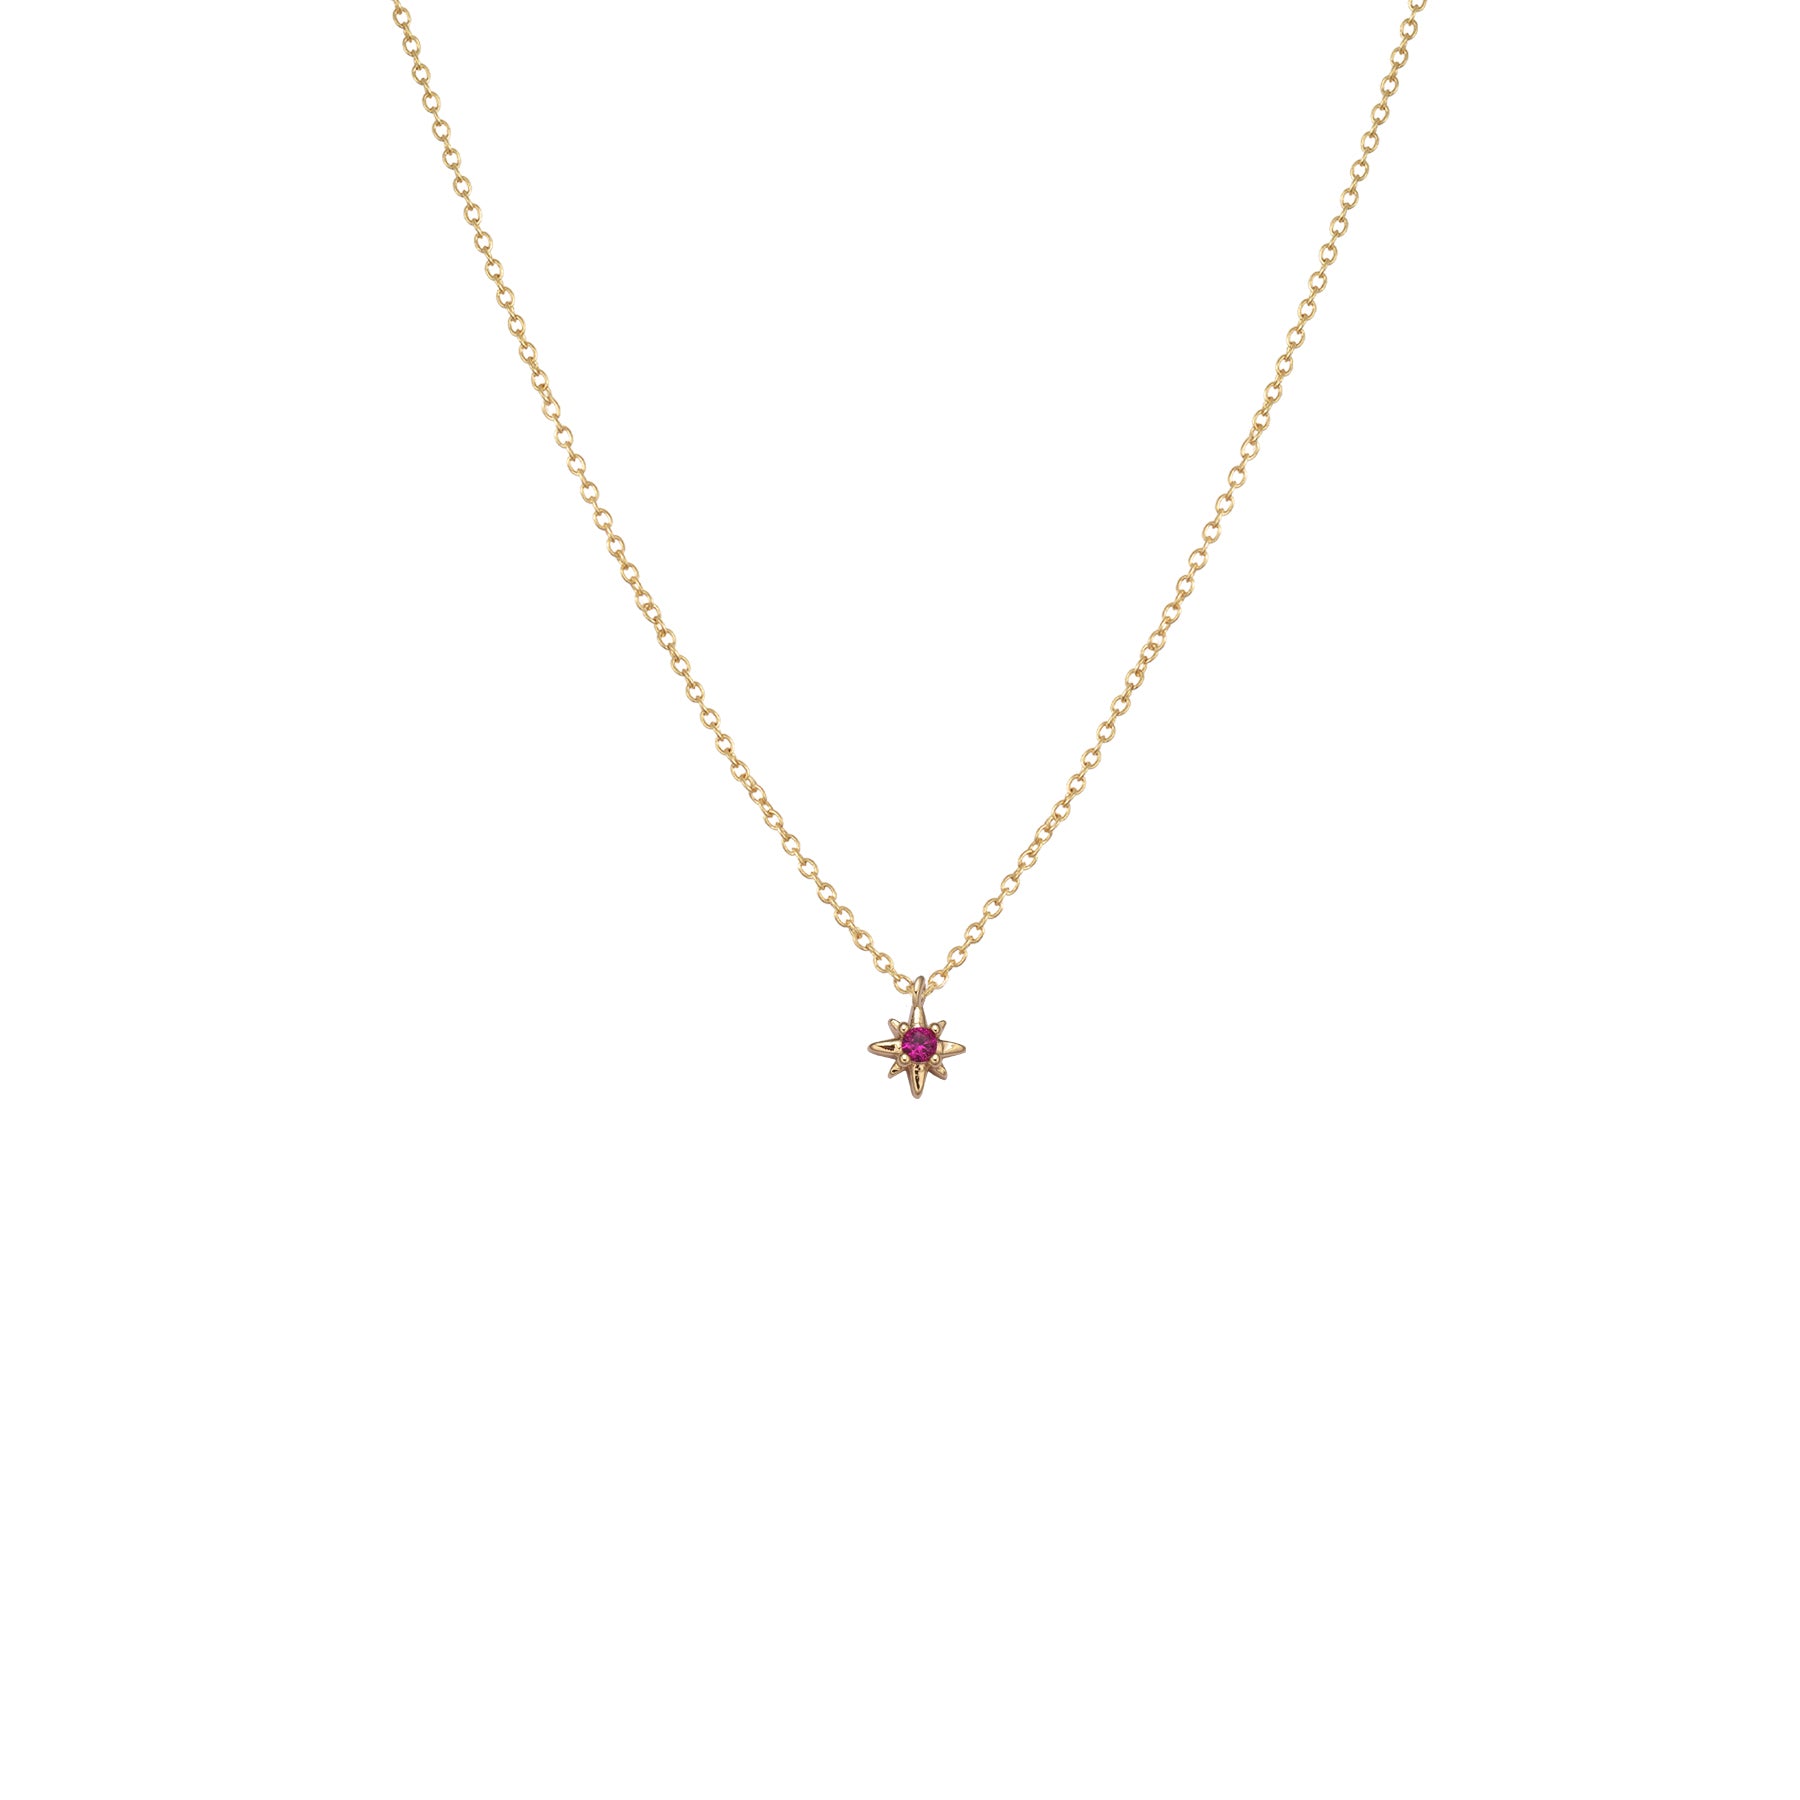 Gold and red sparkling star necklace